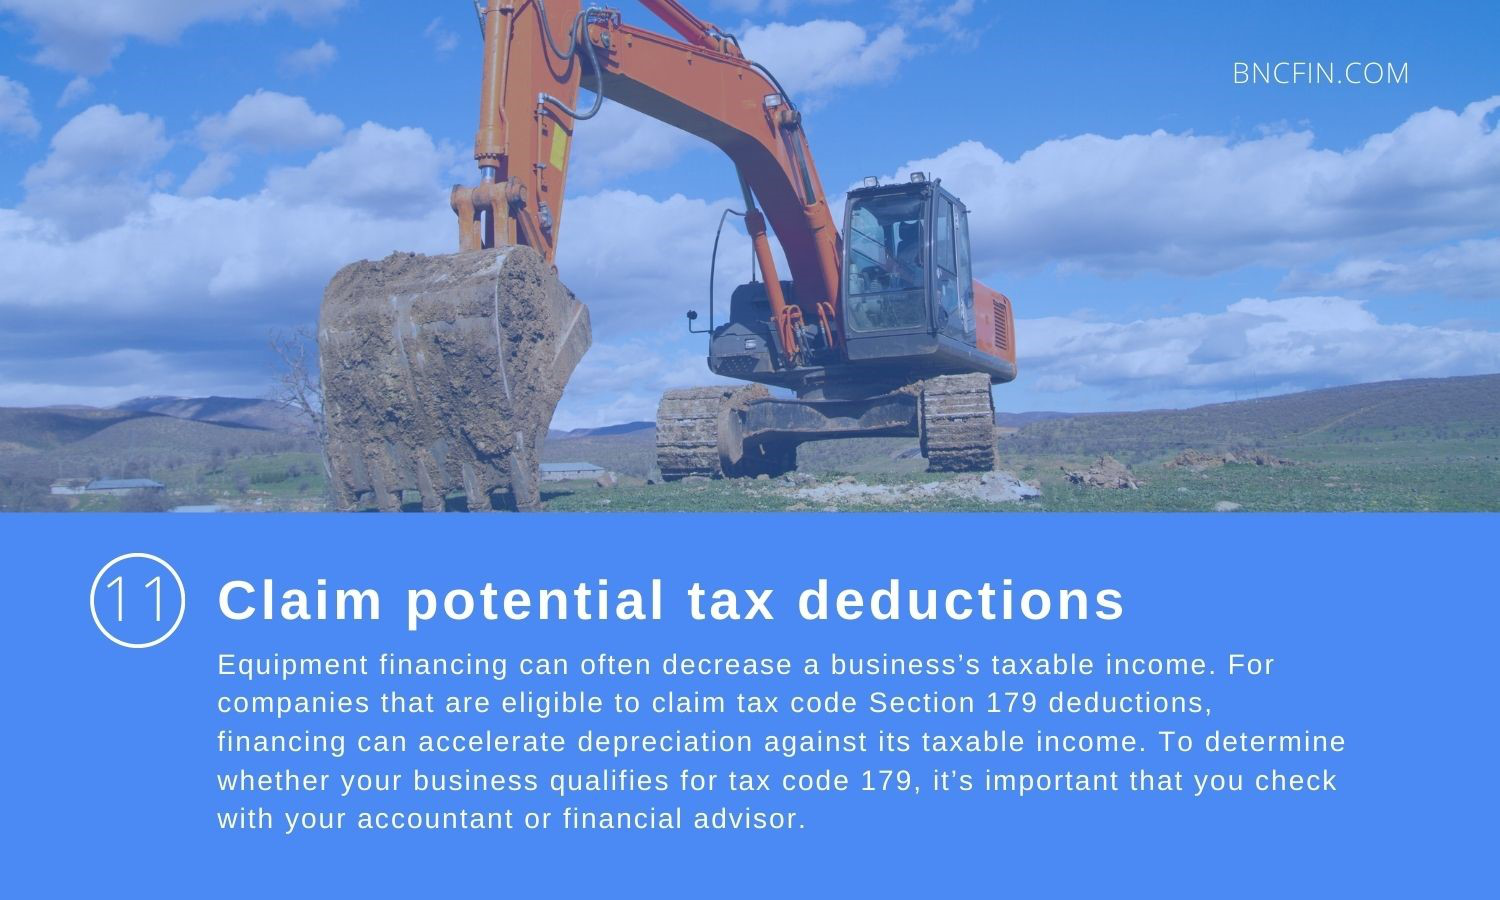 Claim potential tax deductions.